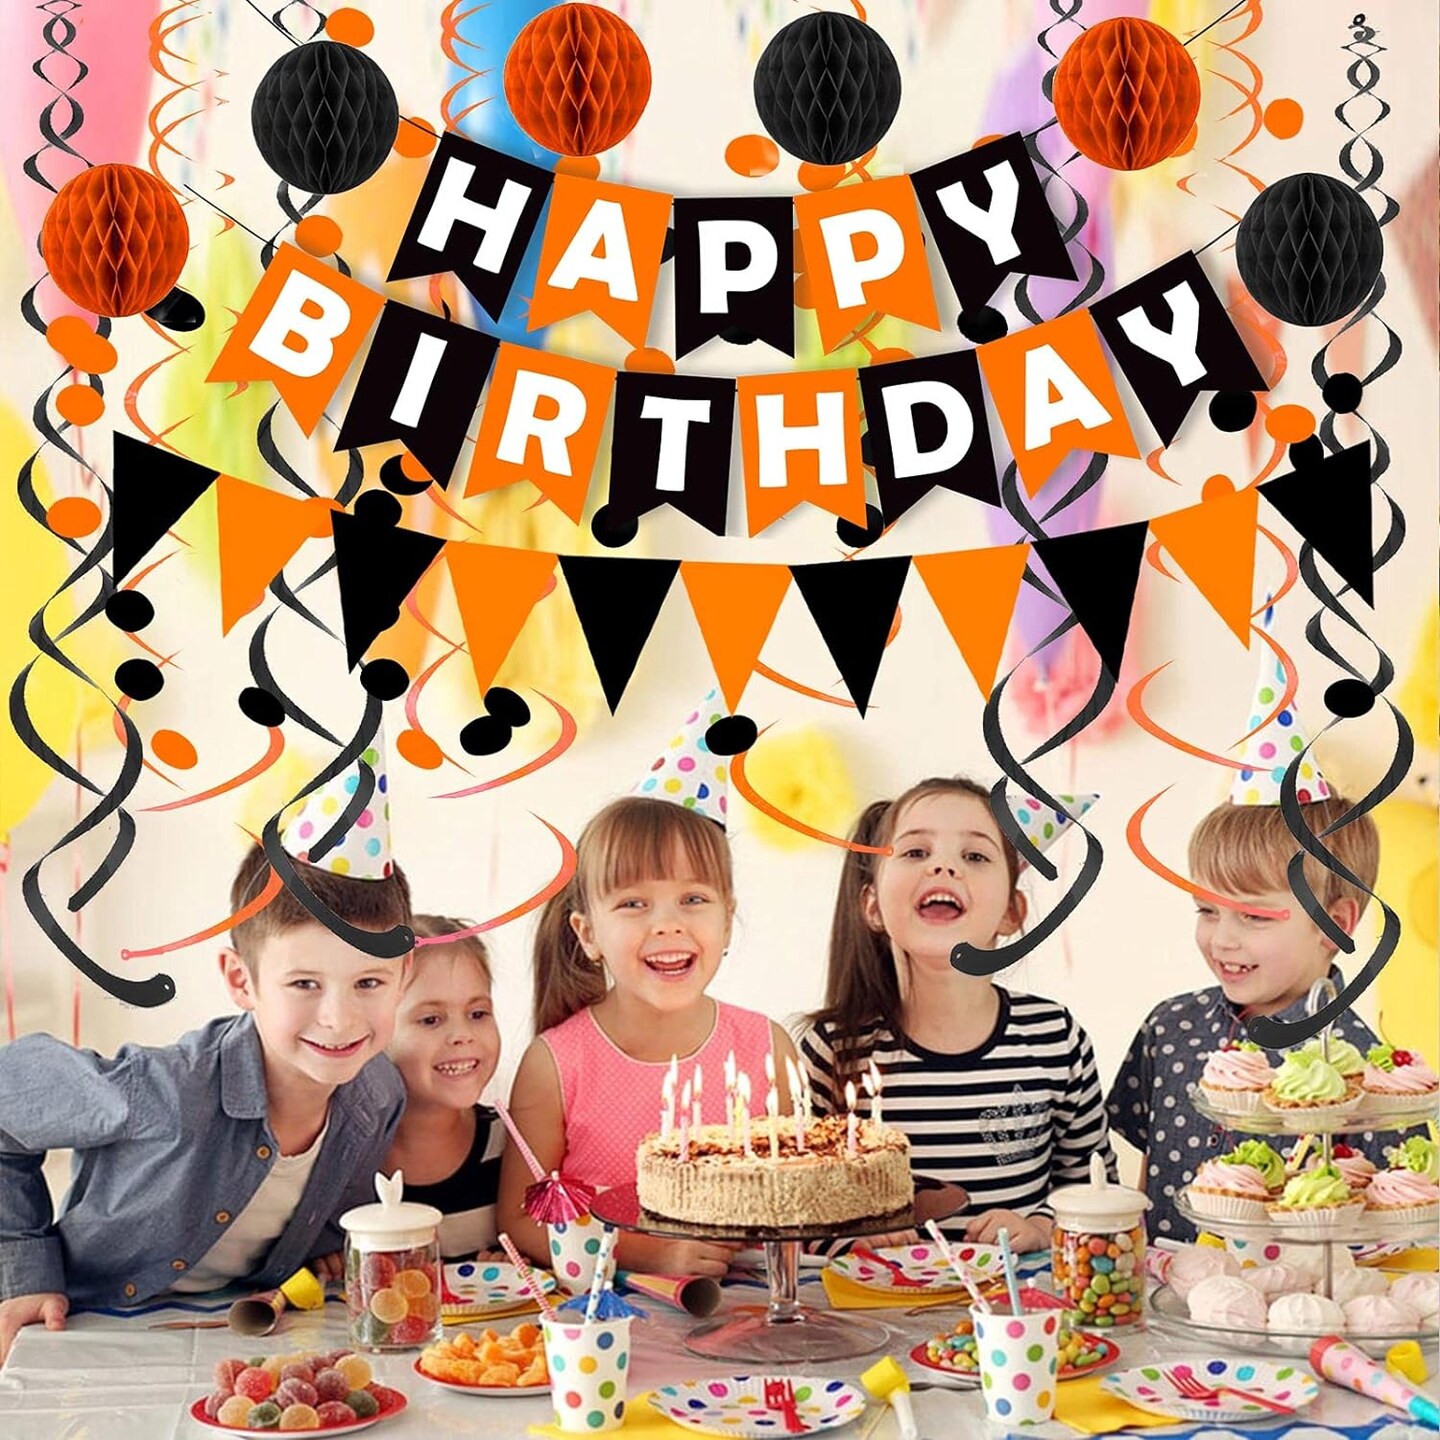 Black Orange Happy Birthday Banner Paper Triangle Flag Bunting Circle Confetti Dots Hanging Garland and Honeycomb Ball Swirl Streamers for Birthday Baby Shower Halloween Party Decoration